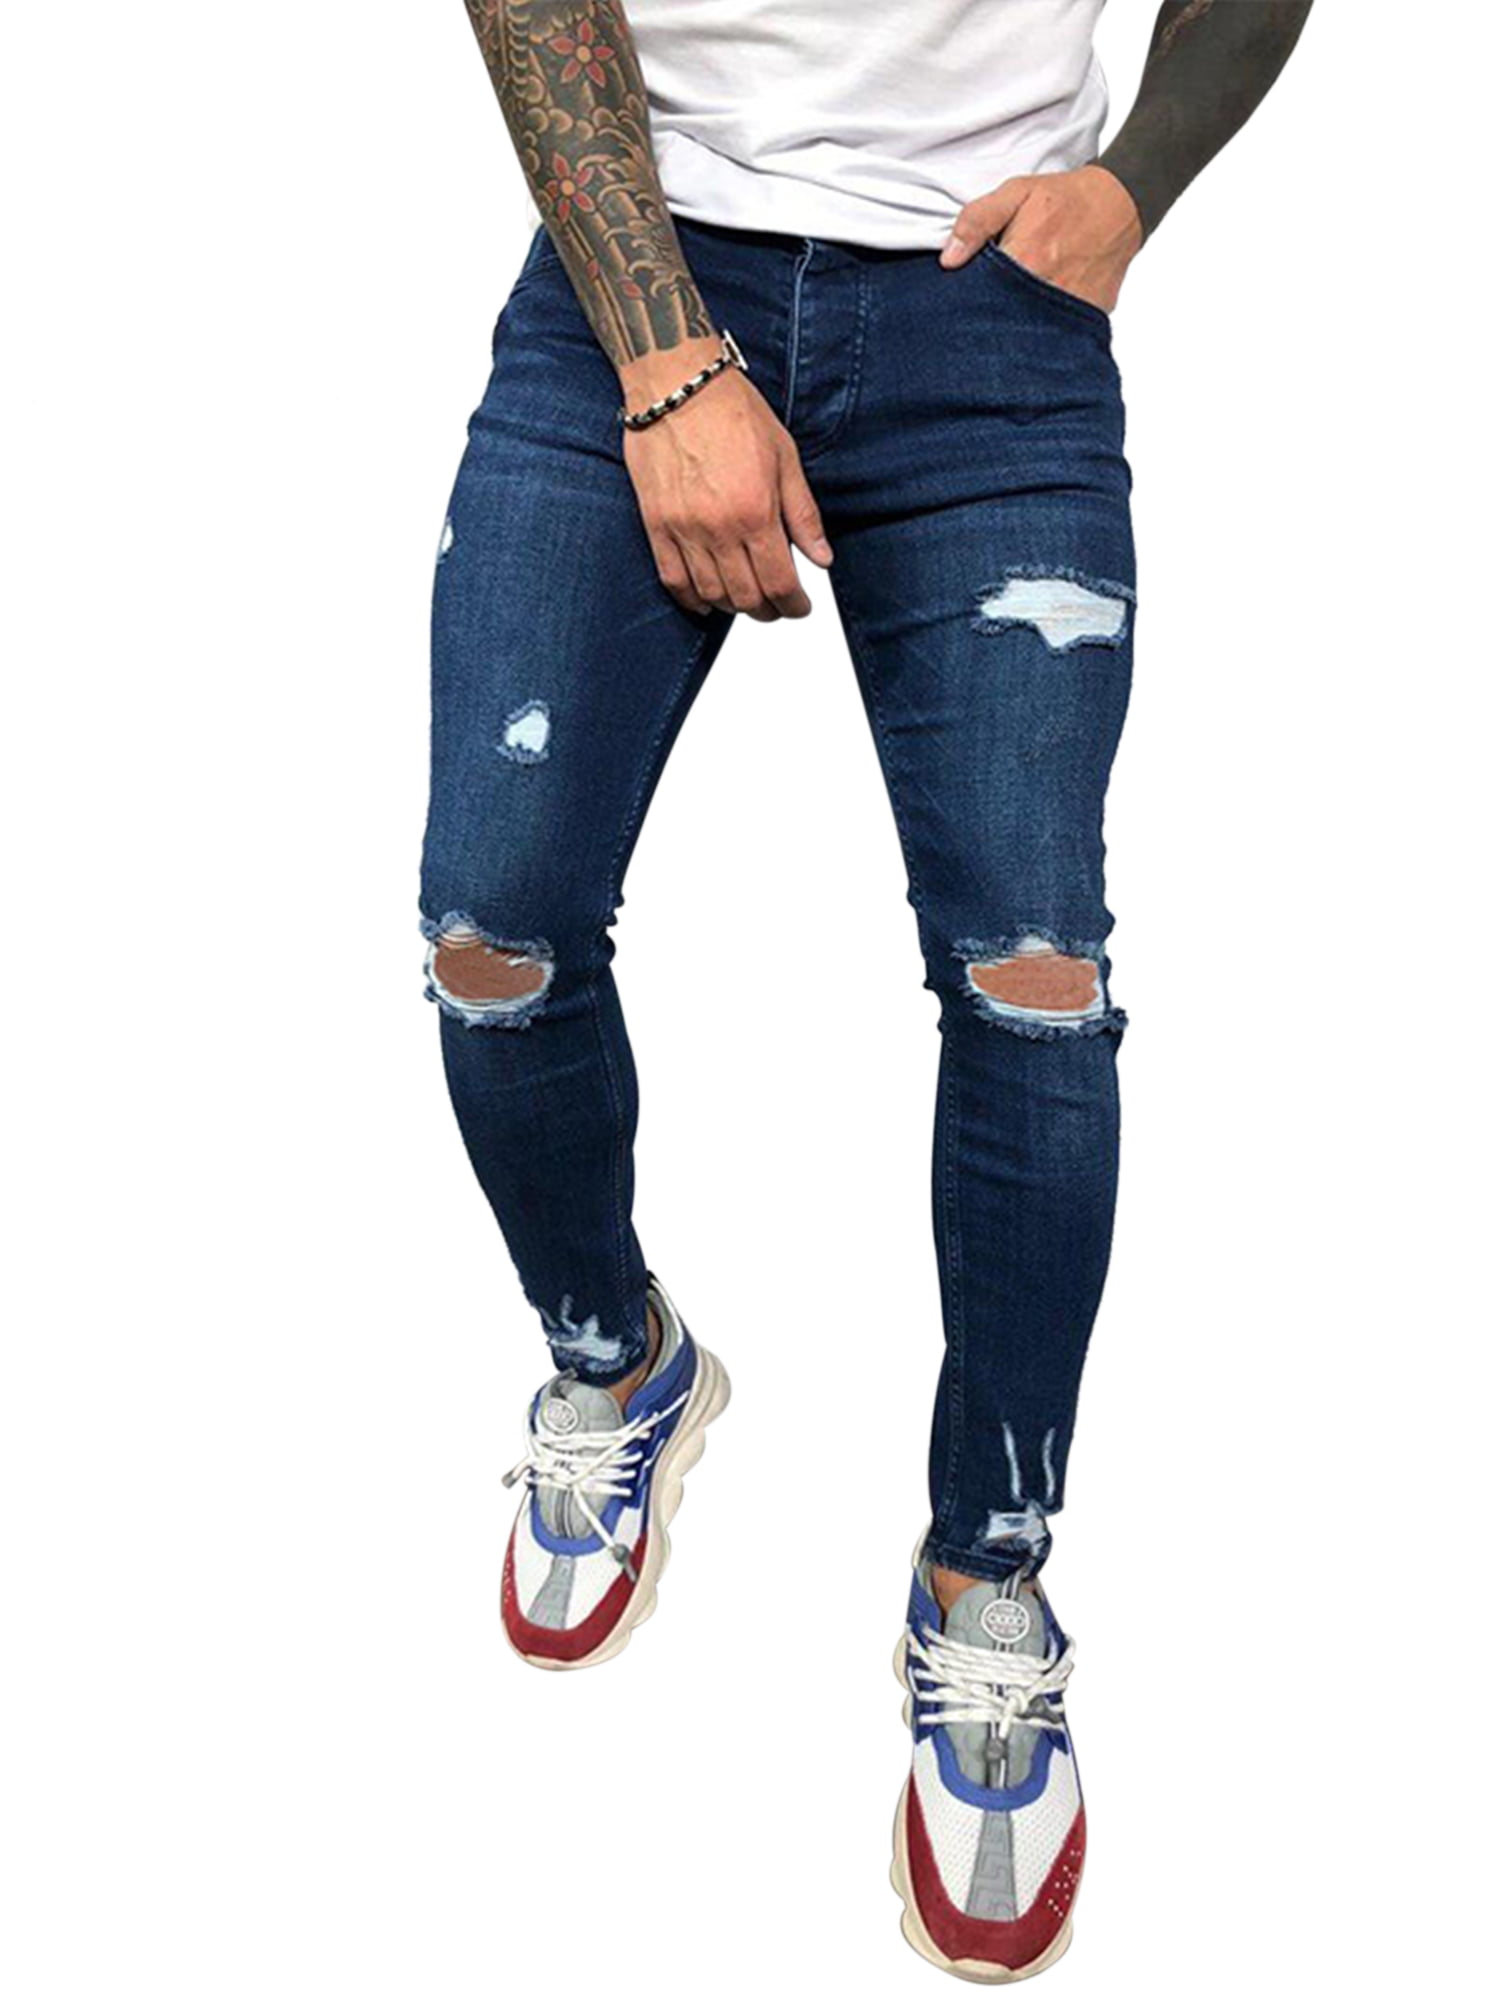 Fieer Mens Fashion Bodycon Washed Holes Mid Waist Pocket Trouser Jean